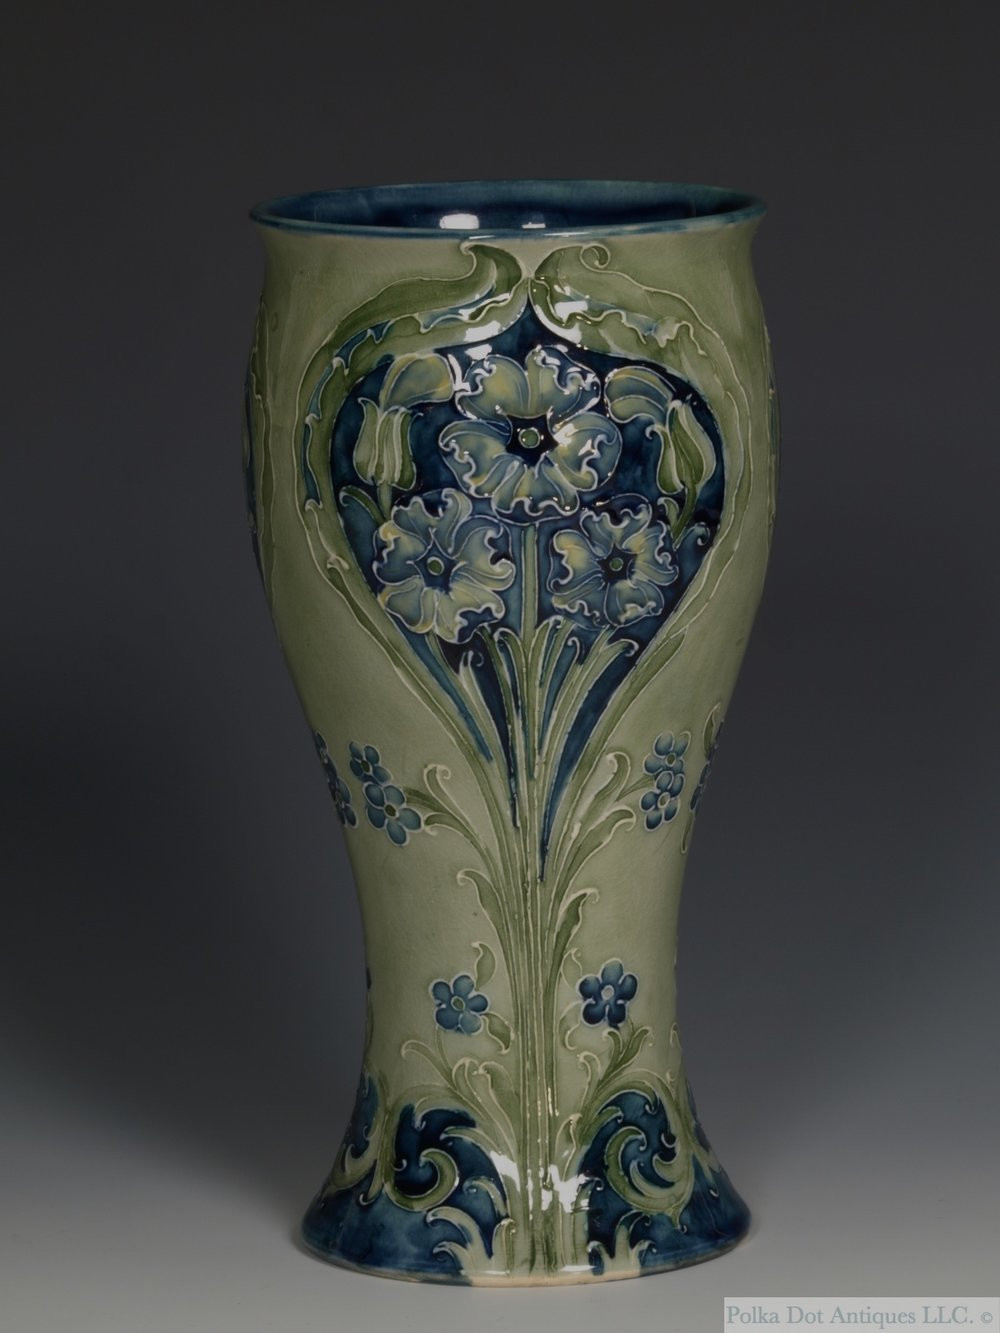 17 Stylish Florian Ware Vase 2024 free download florian ware vase of archive polka dot antiques llc throughout william moorcroft florian ware liberty vase c 1903 13